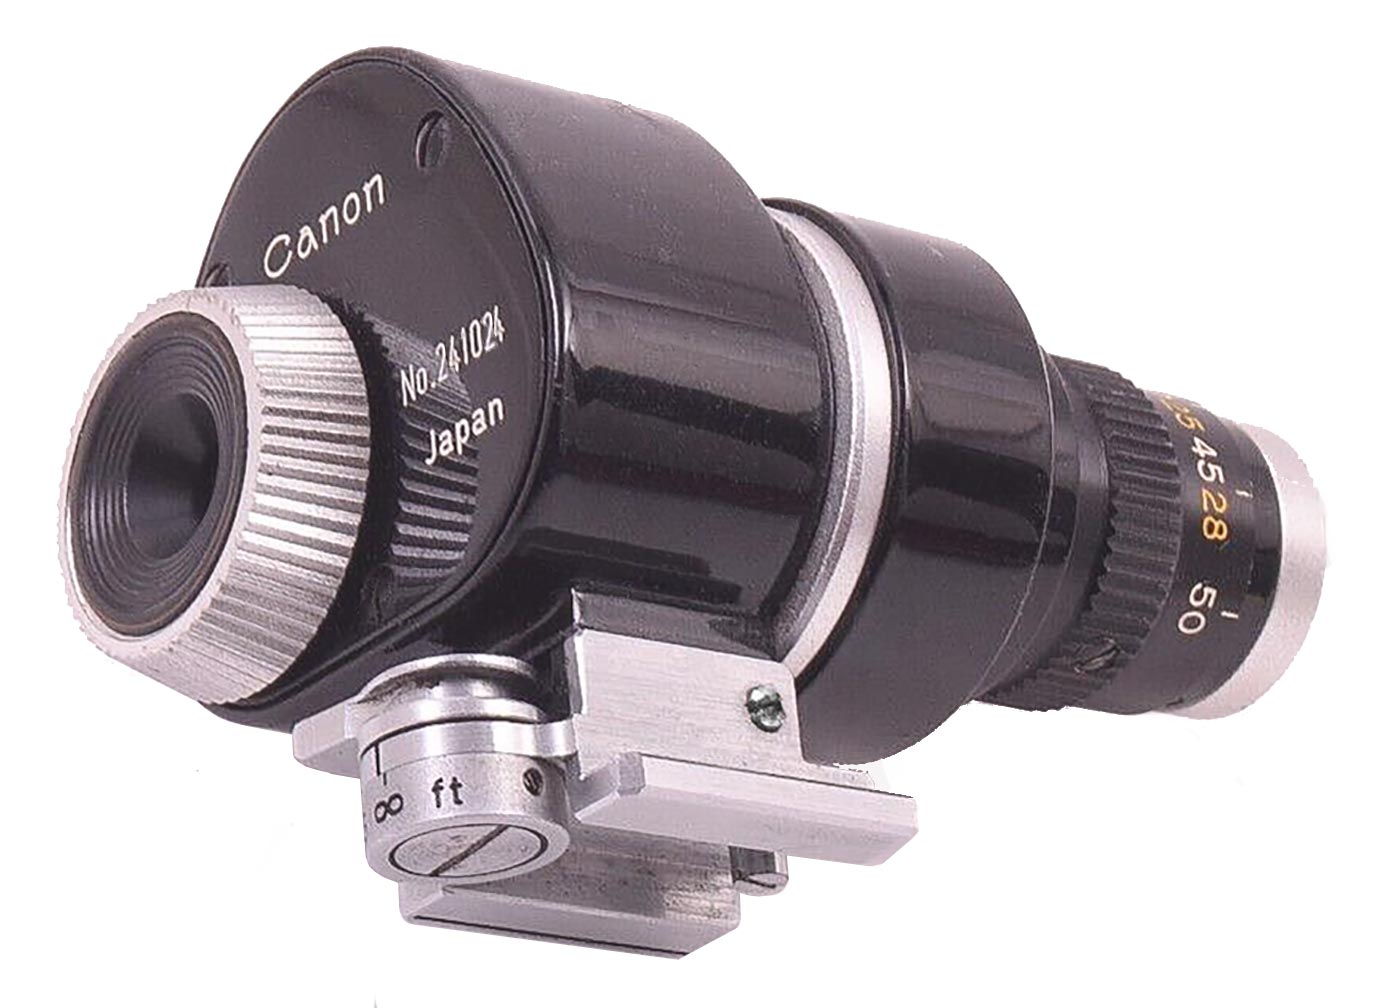 Canon Universal Zoom Finder